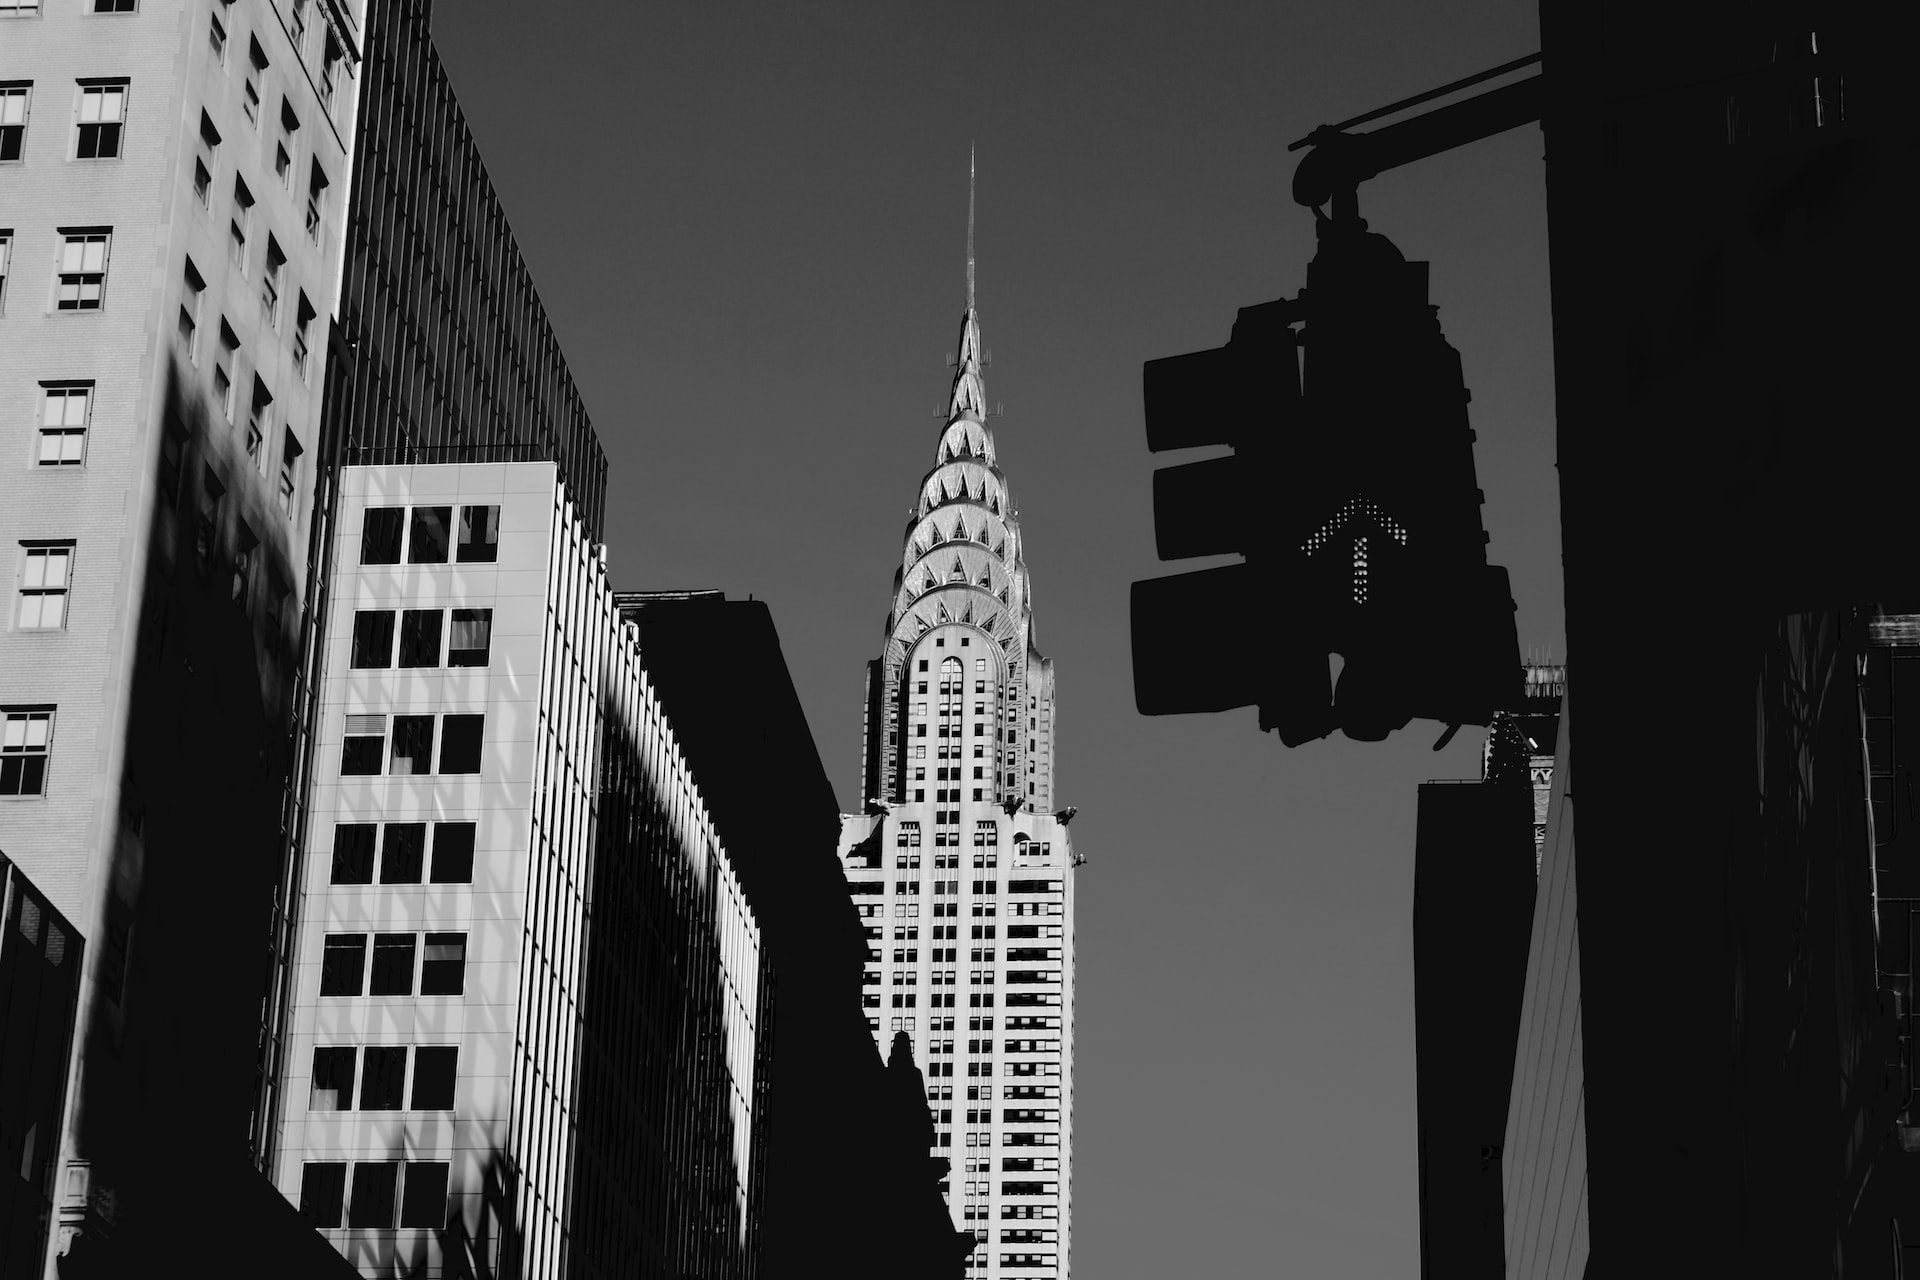 The Iconic Chrysler Building – A New York City Landmark and Masterpiece of Art Deco Architecture